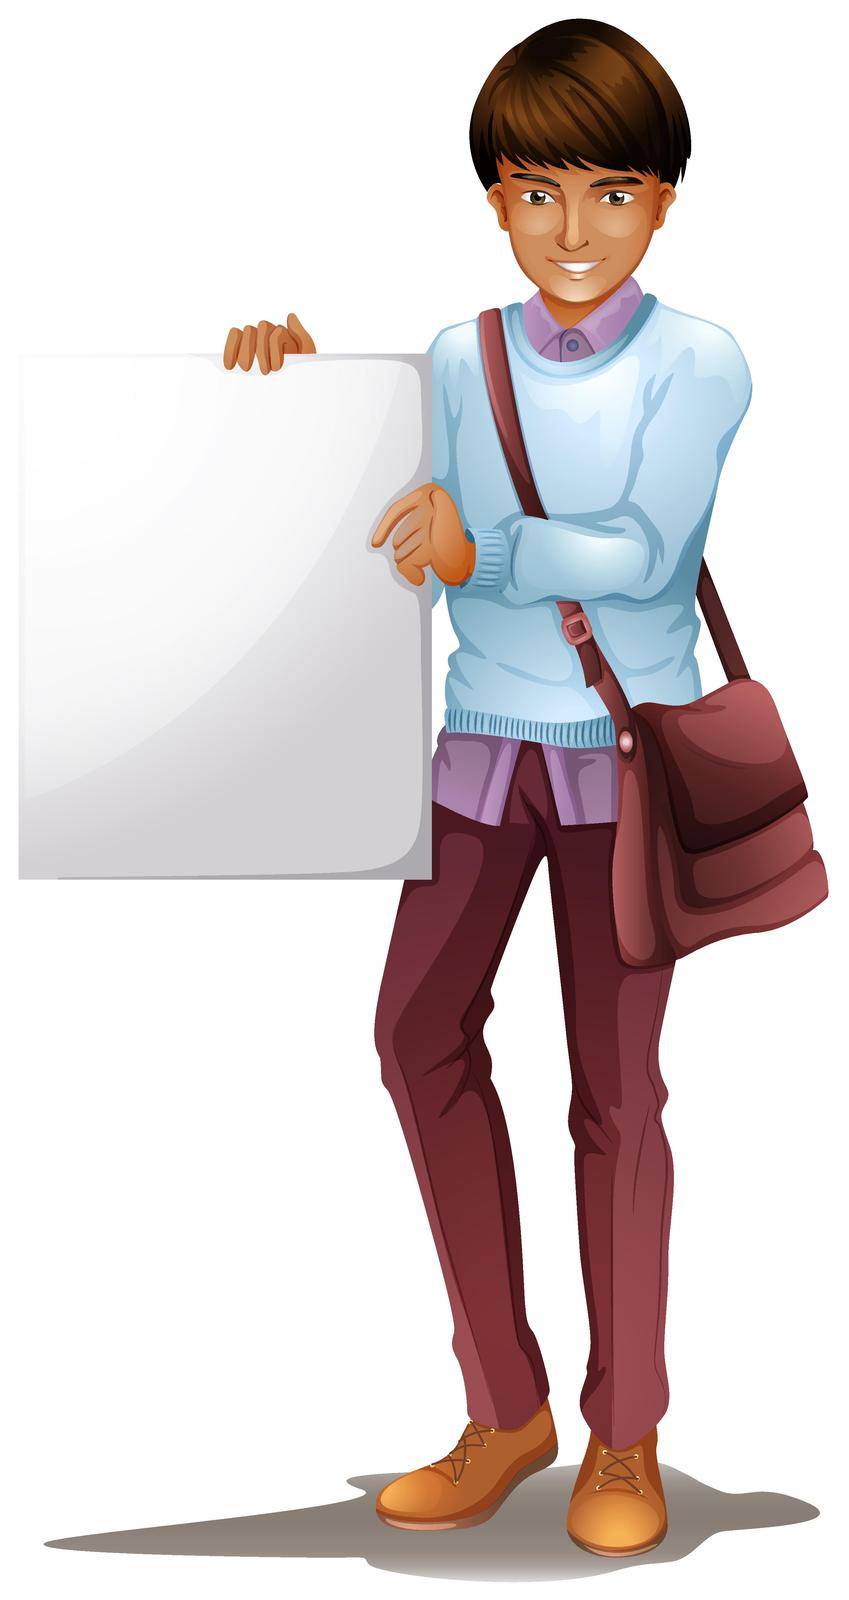 Illustration of a boy holding an empty board on a white background